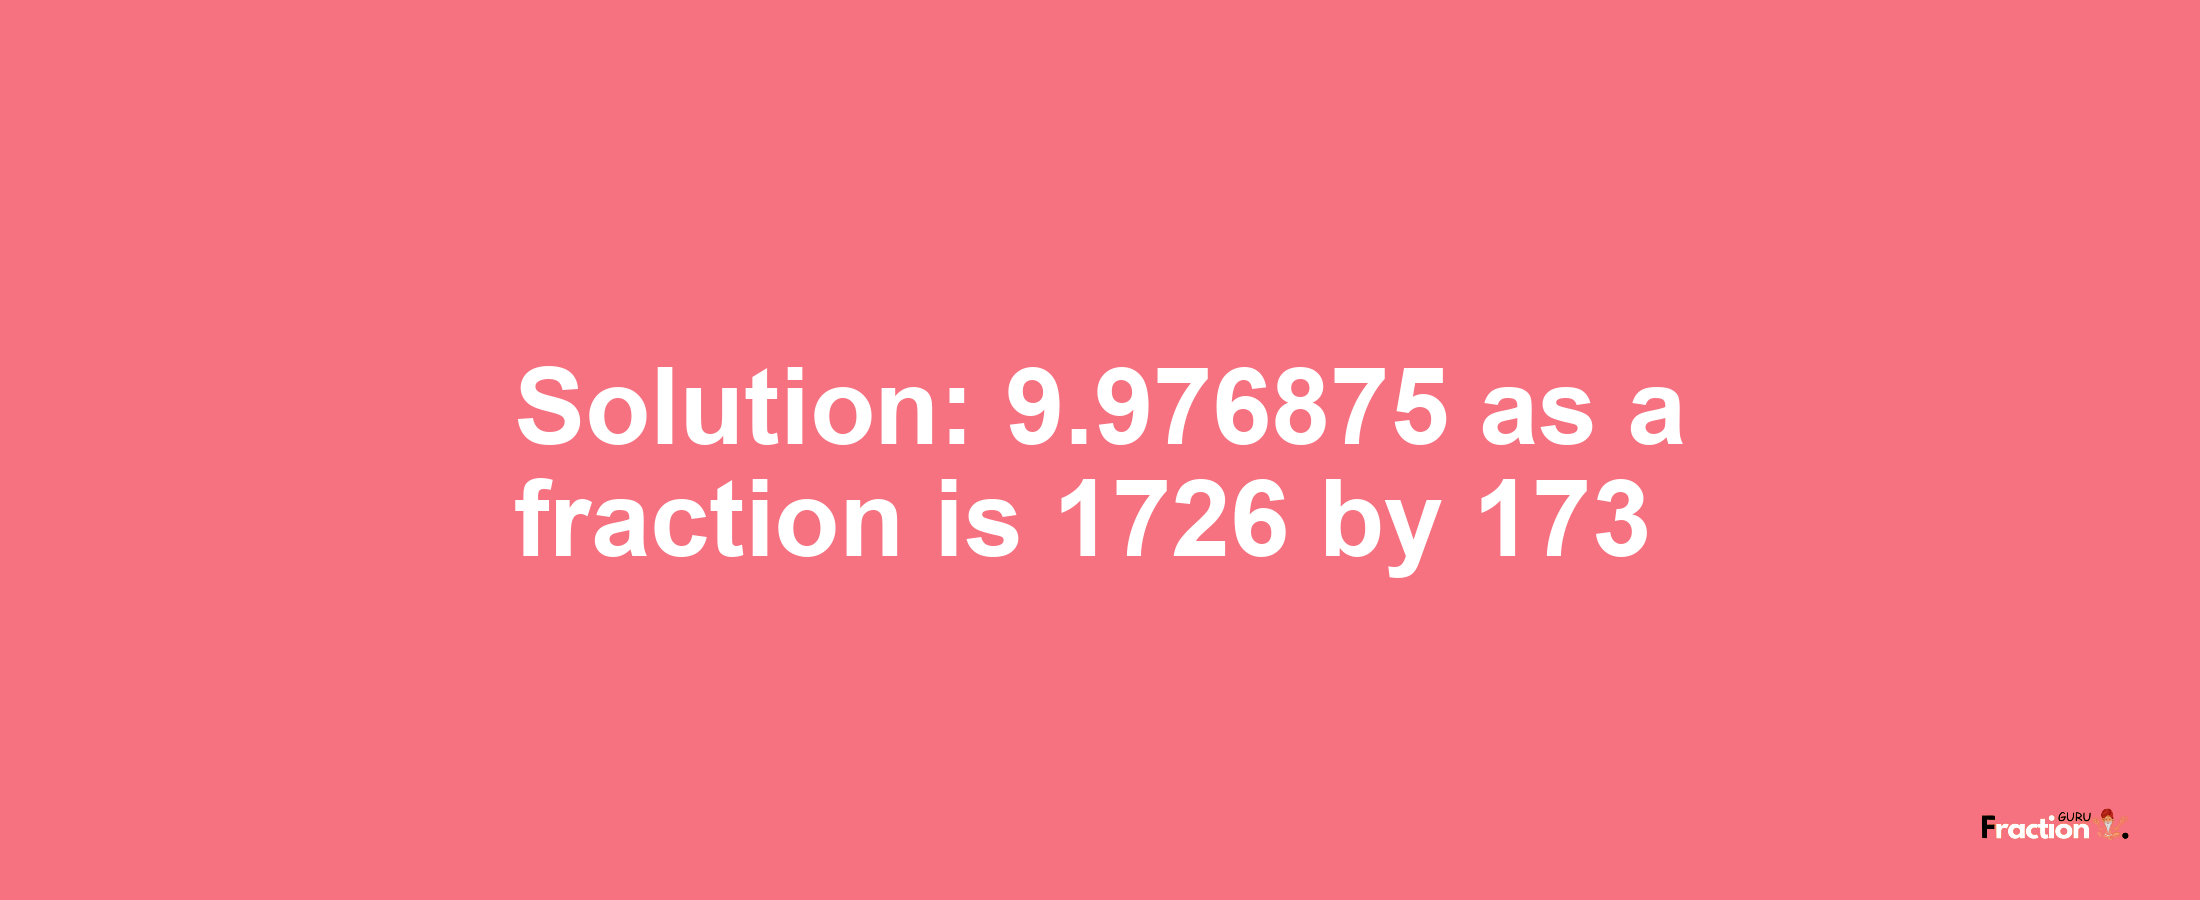 Solution:9.976875 as a fraction is 1726/173